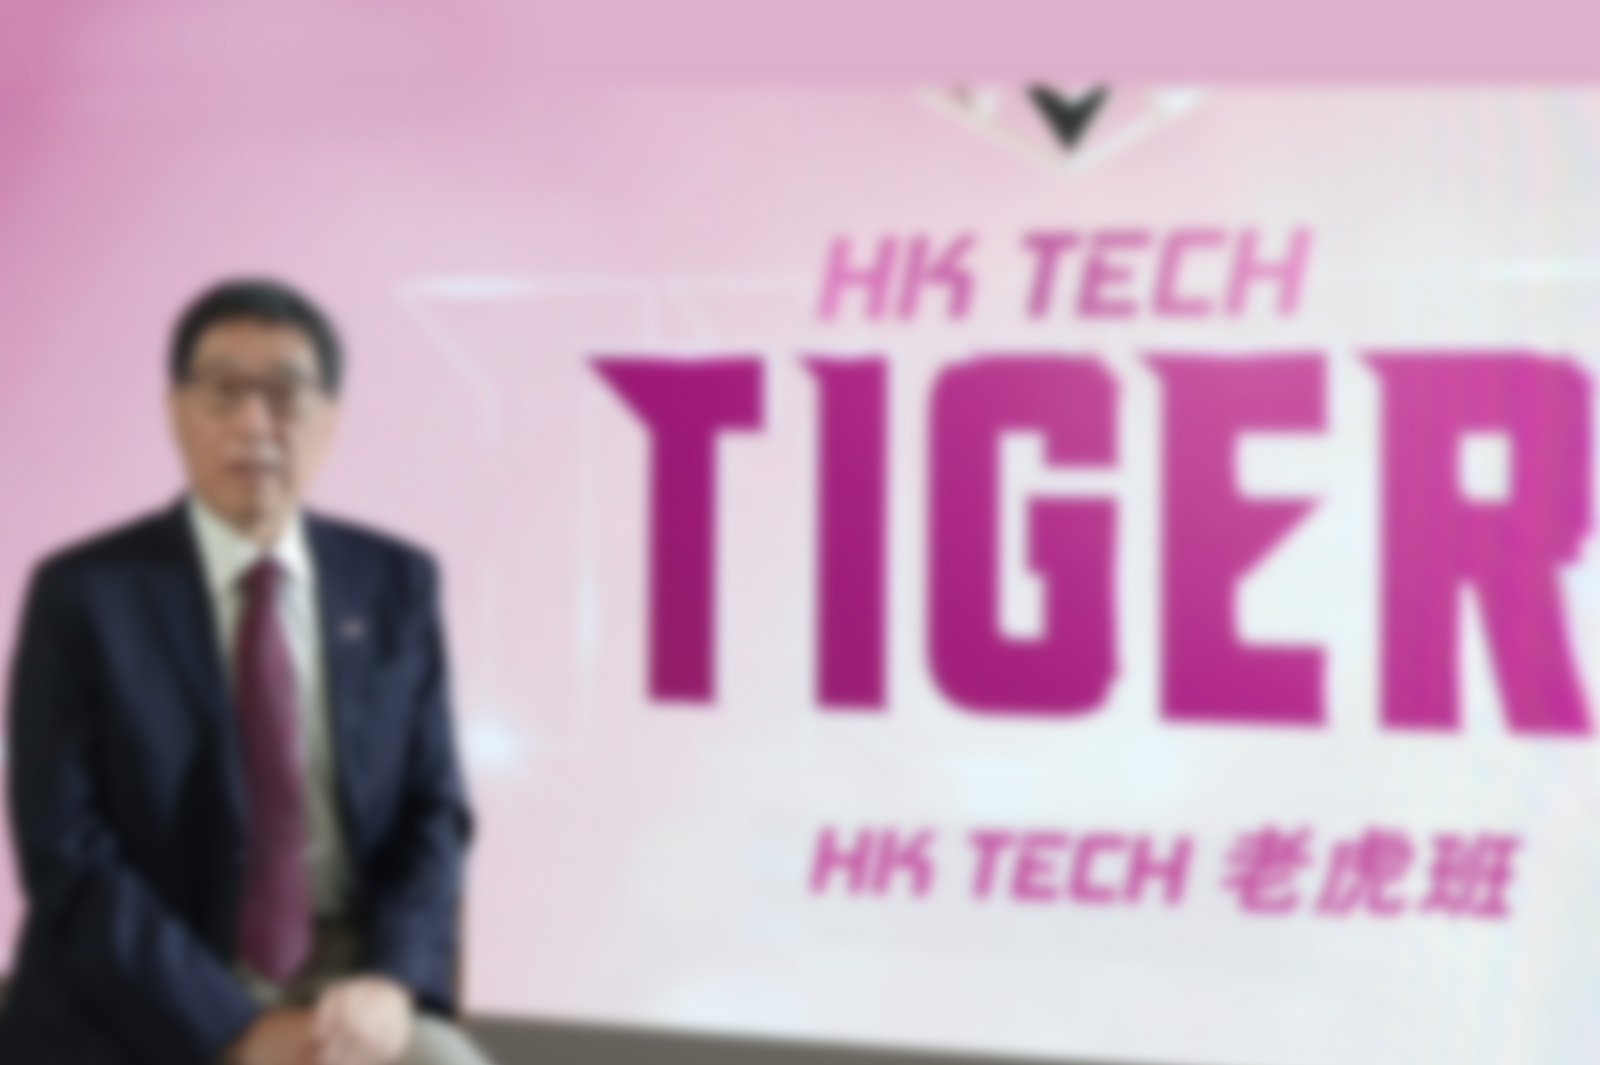 HK TECH Tiger at CityU nurtures science and innovation leaders